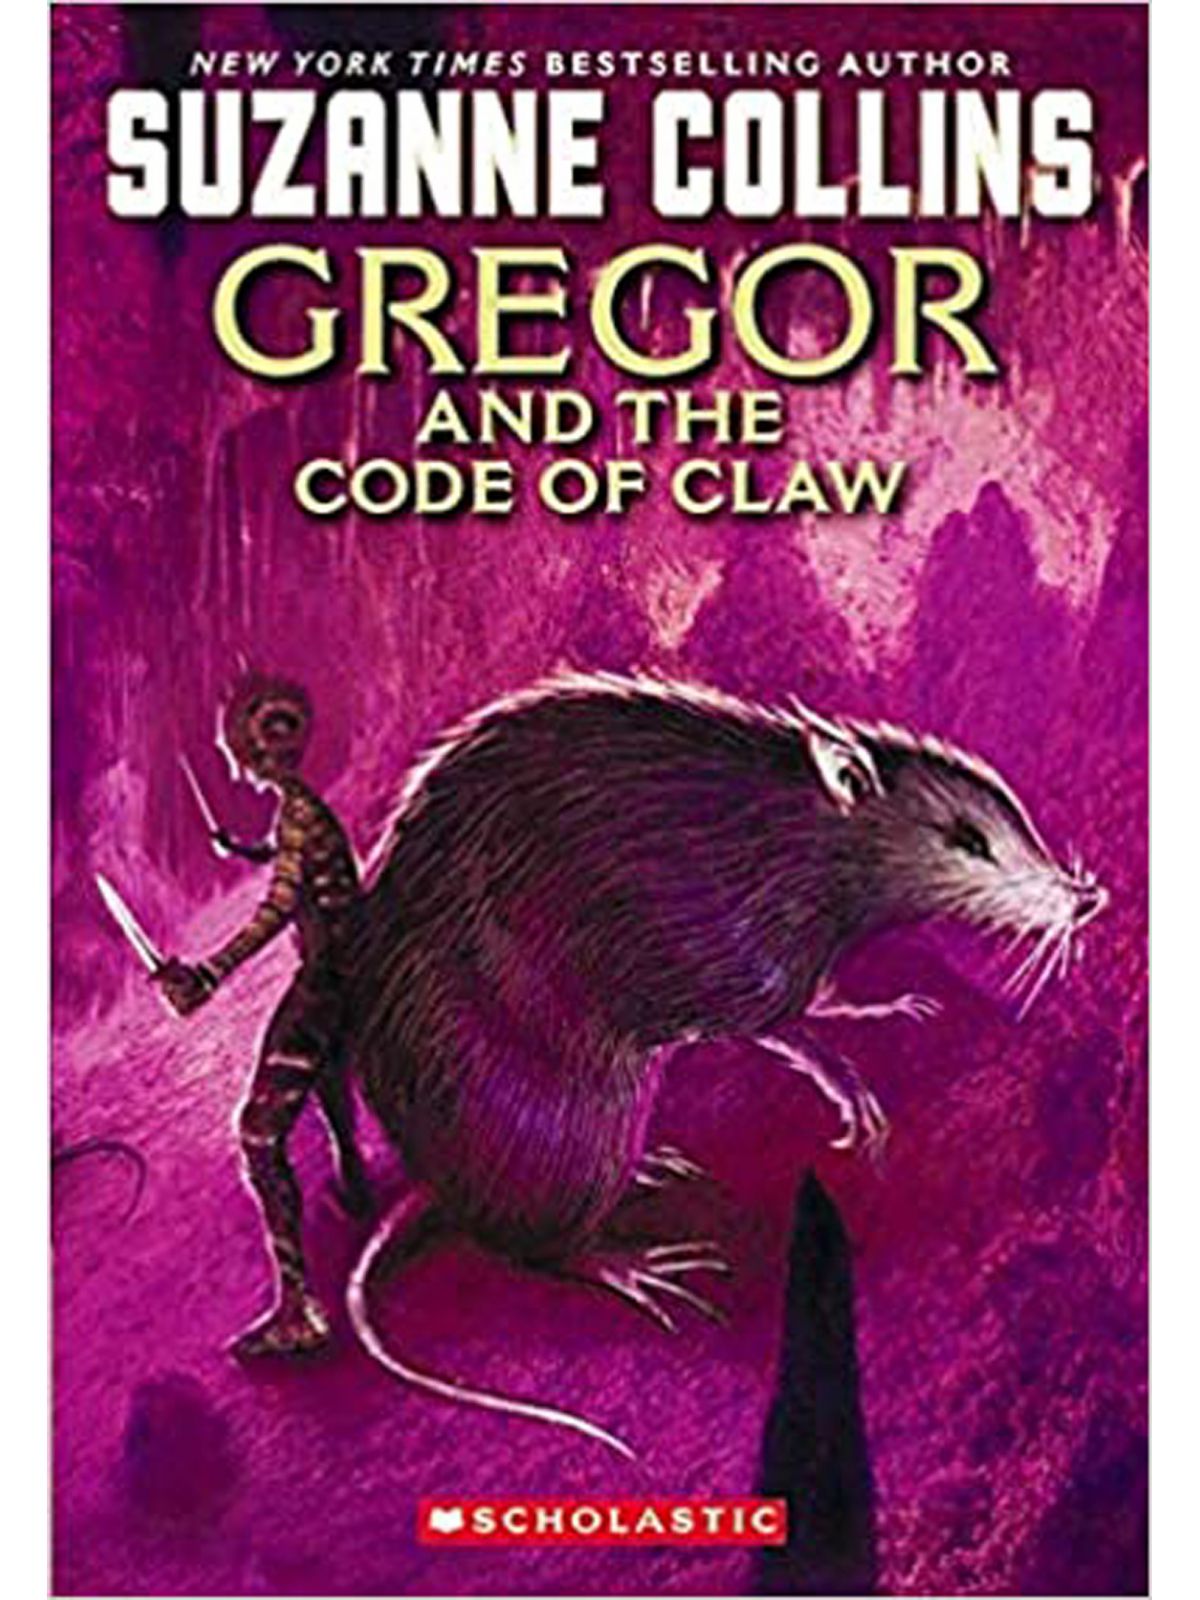 GREGOR AND THE CODE OF CLAW/UNDERLAND CHRONICLES#5 COLLINS, SUZANNE Купить Книгу на Английском